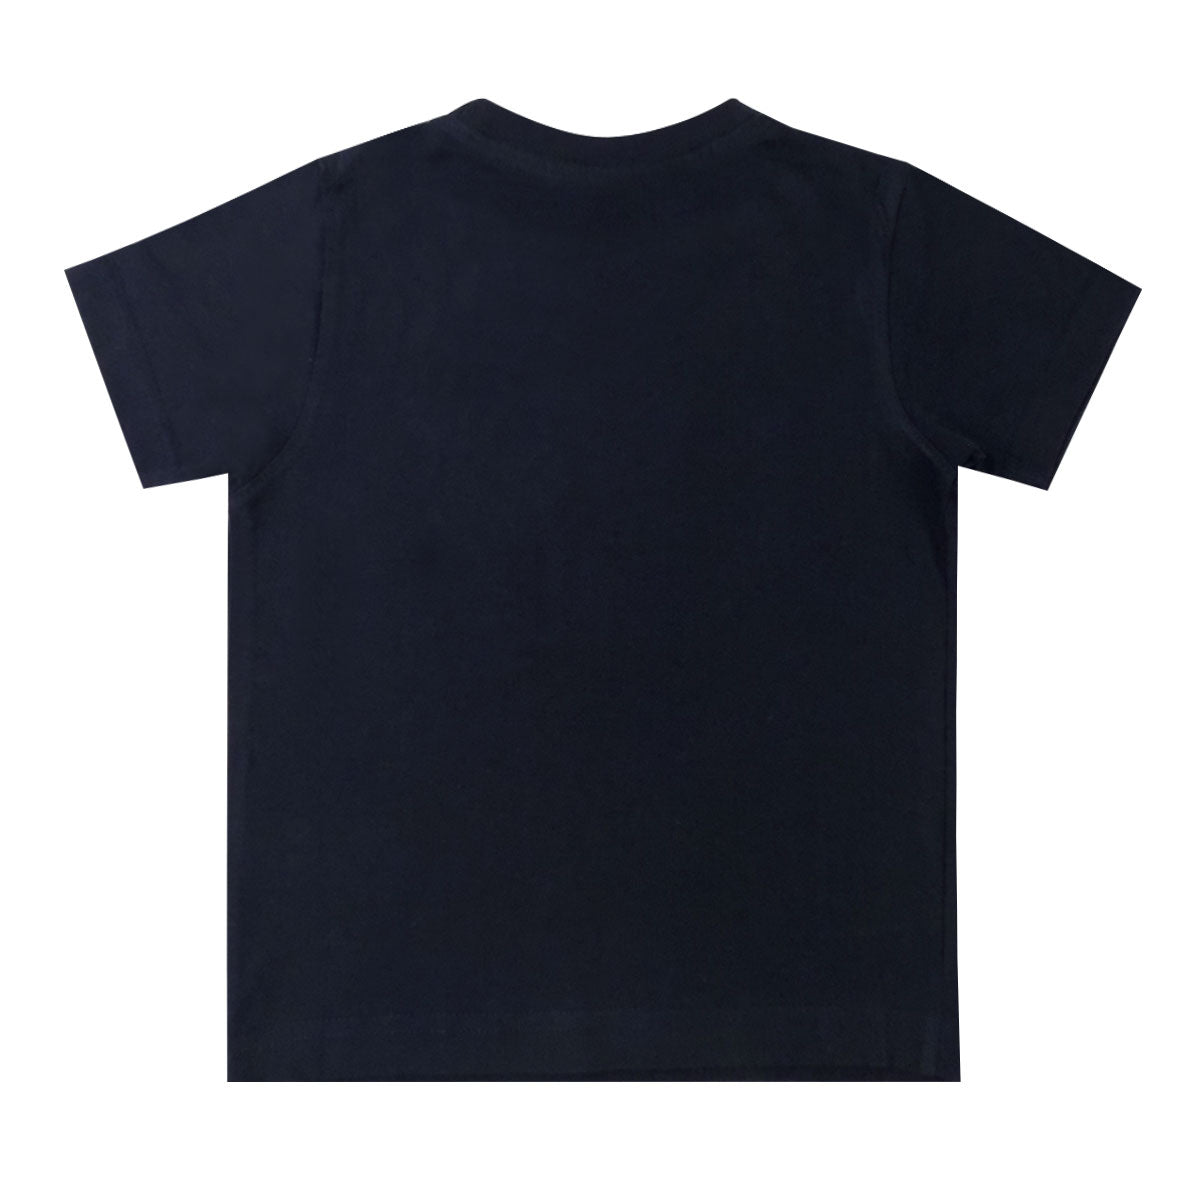 I Can - Premium Round Neck Cotton Tees for Kids - Navy Blue